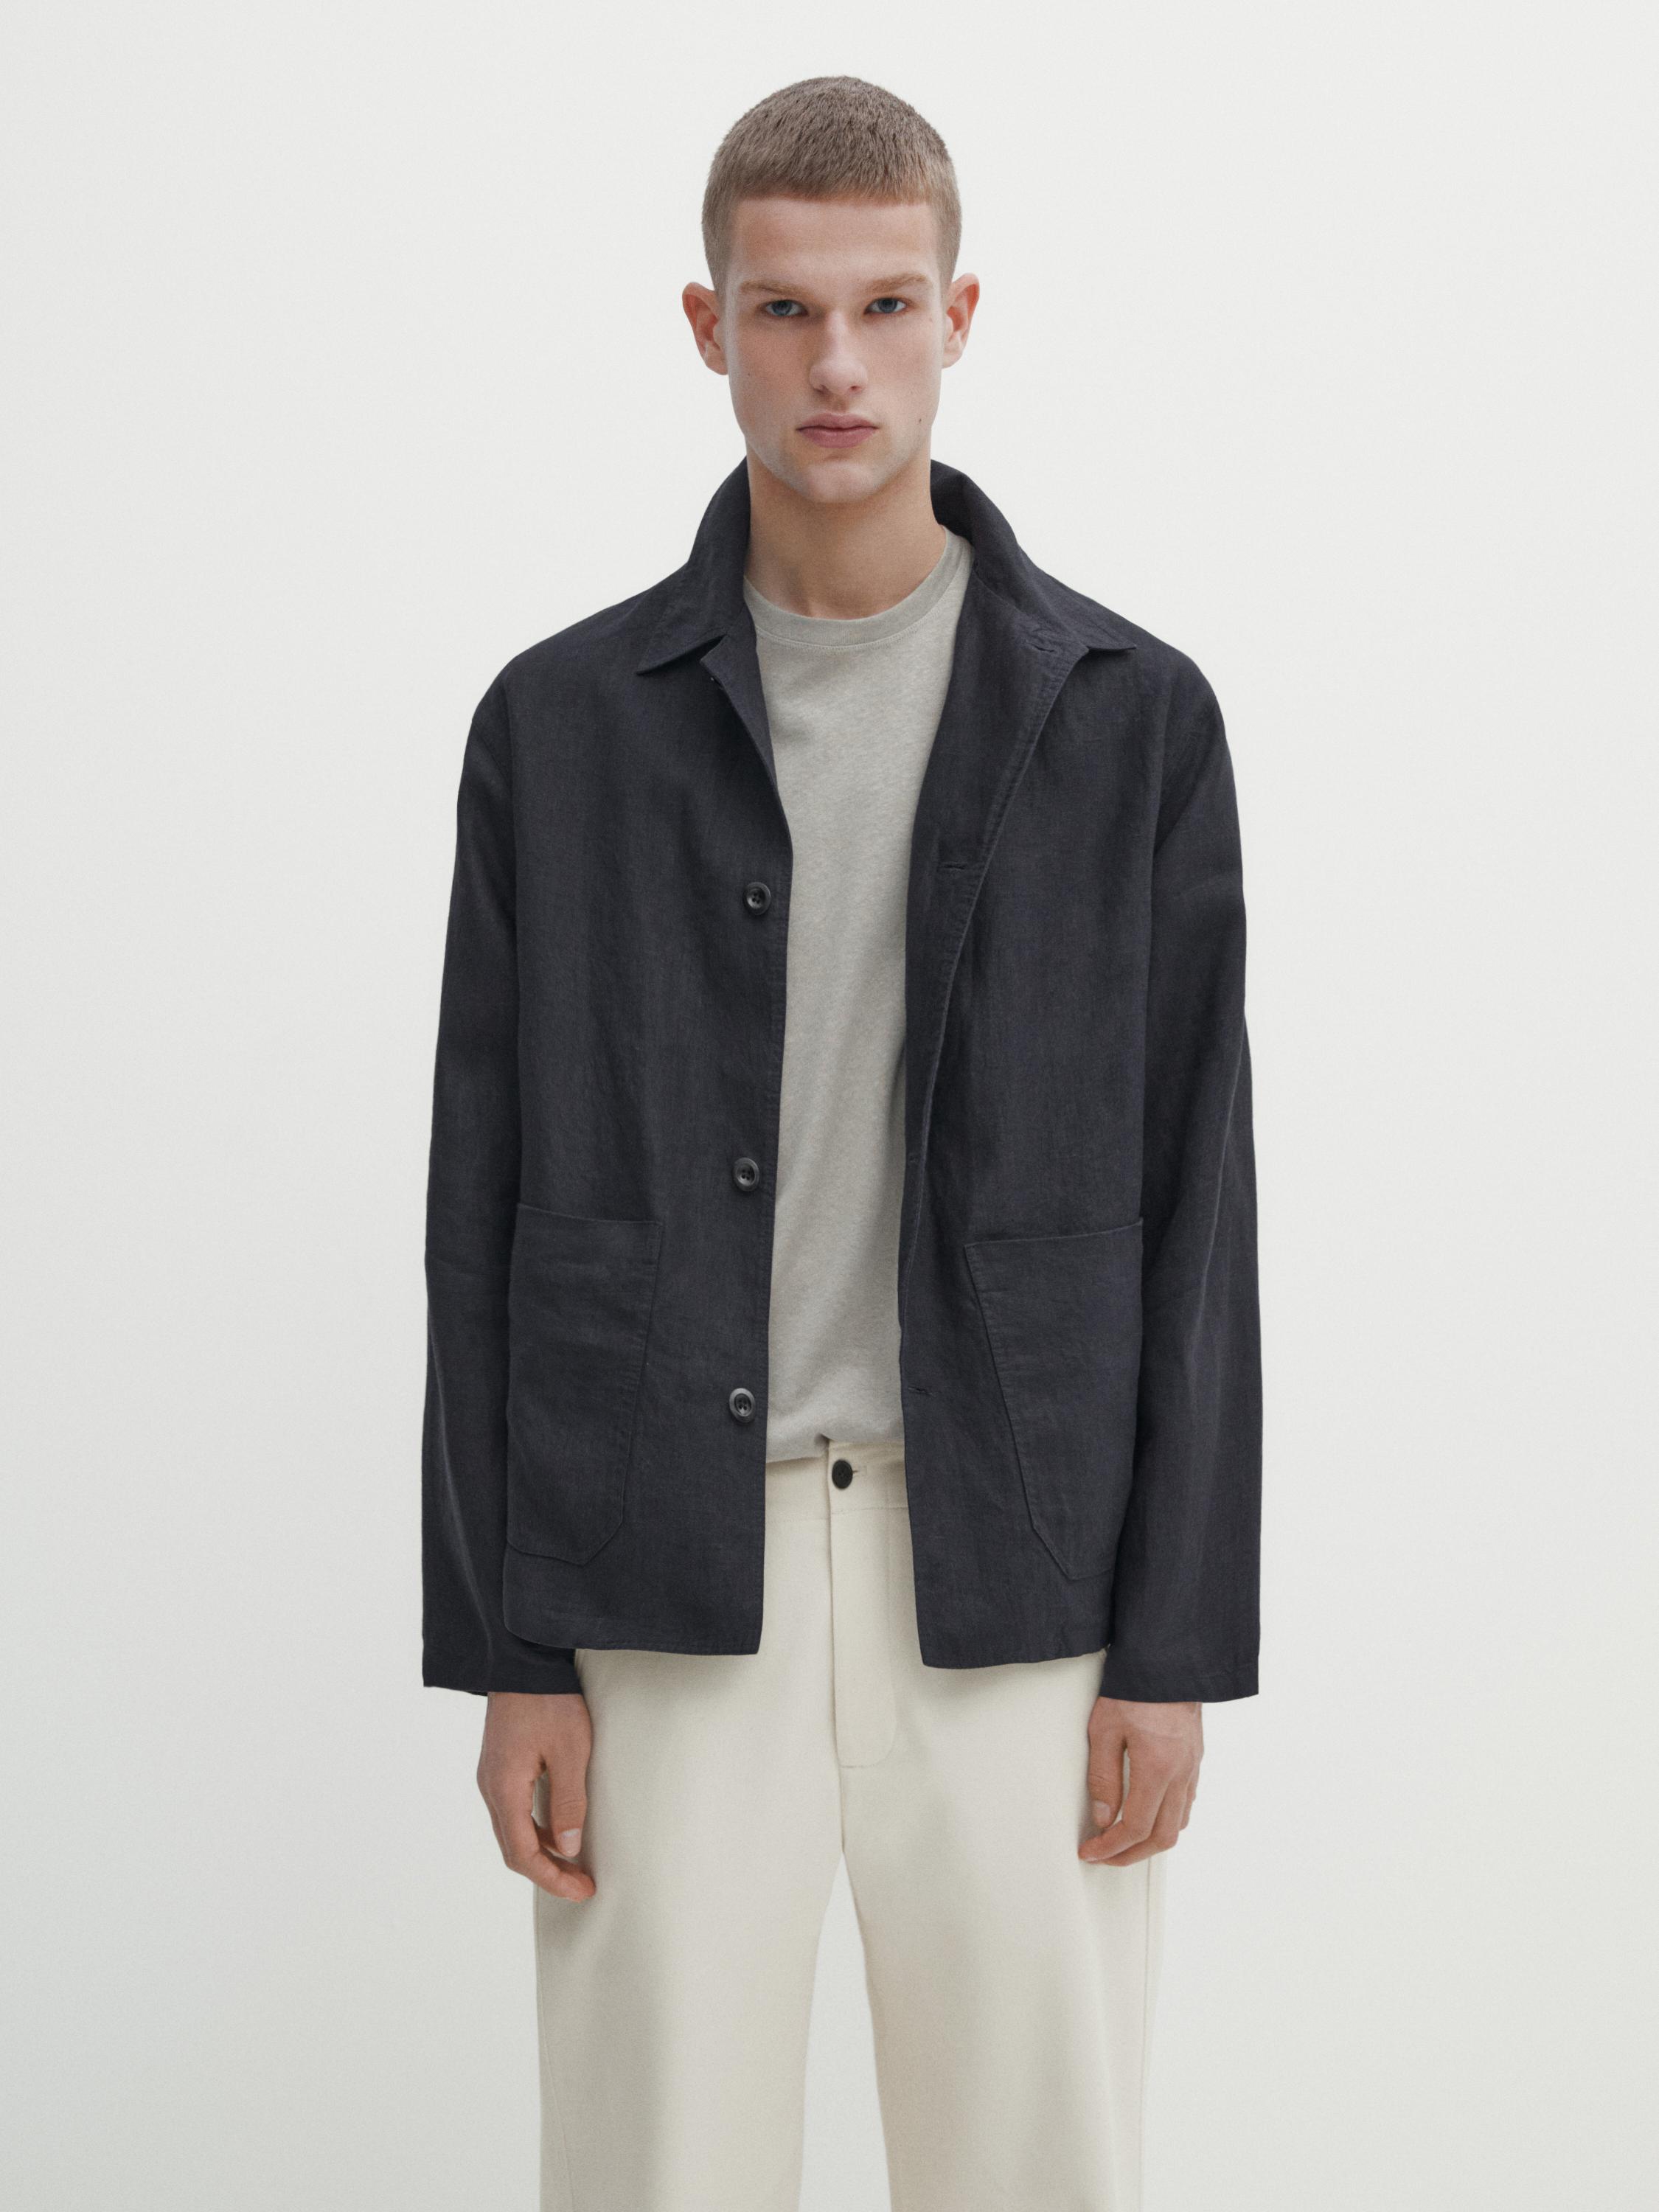 100% linen jacket with buttons - Navy blue | ZARA United States